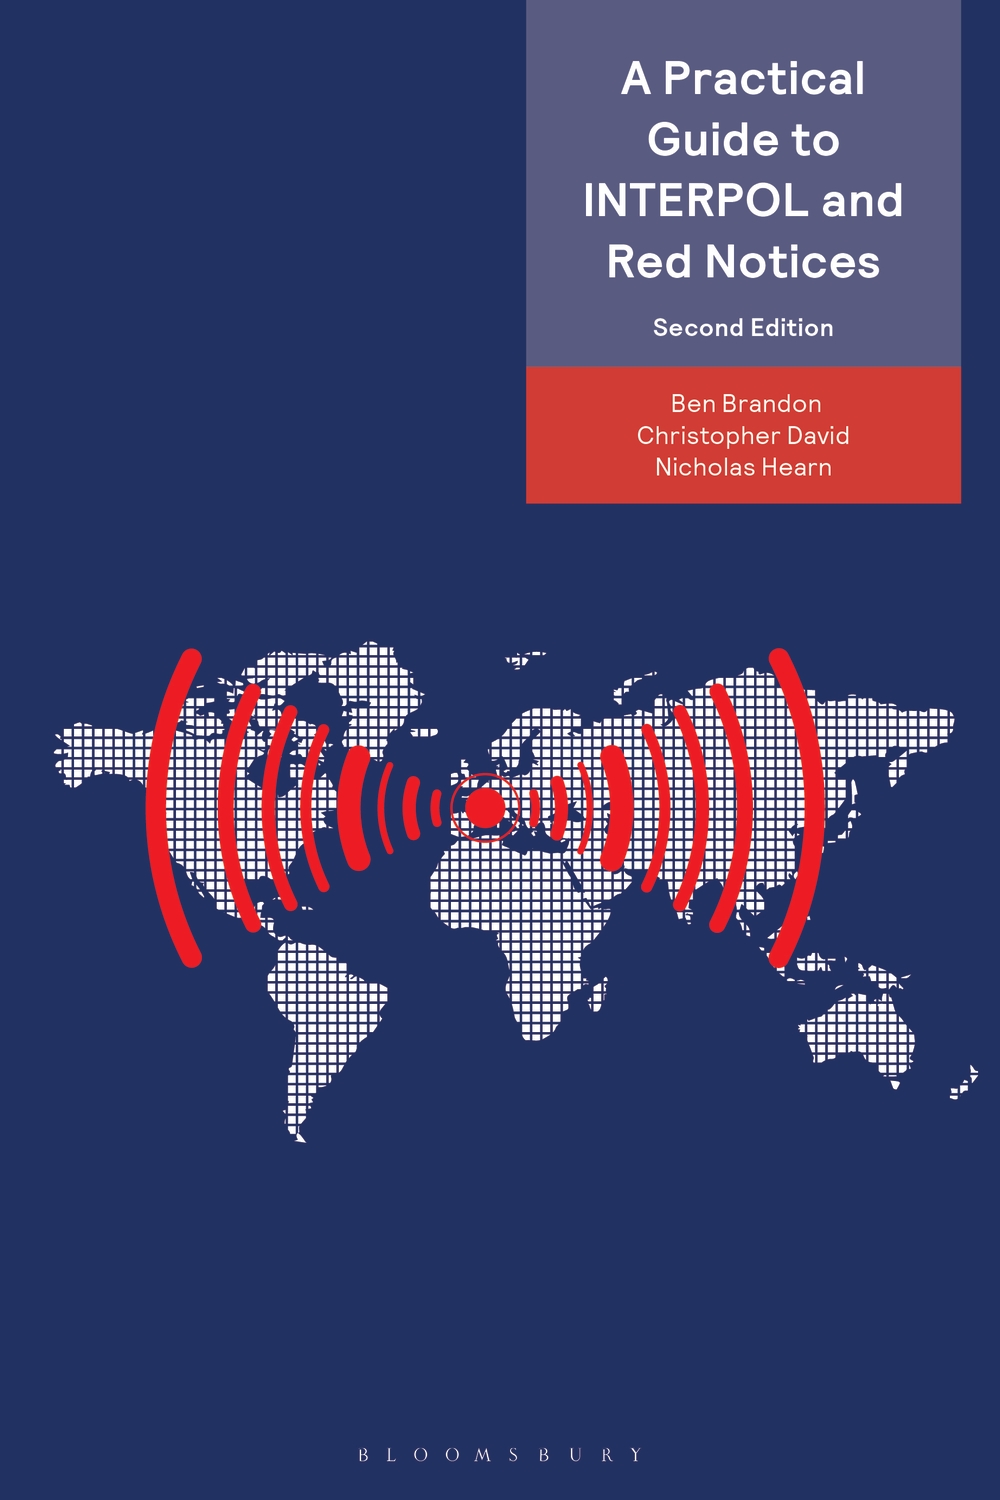 Practical Guide to INTERPOL and Red Notices book jacket